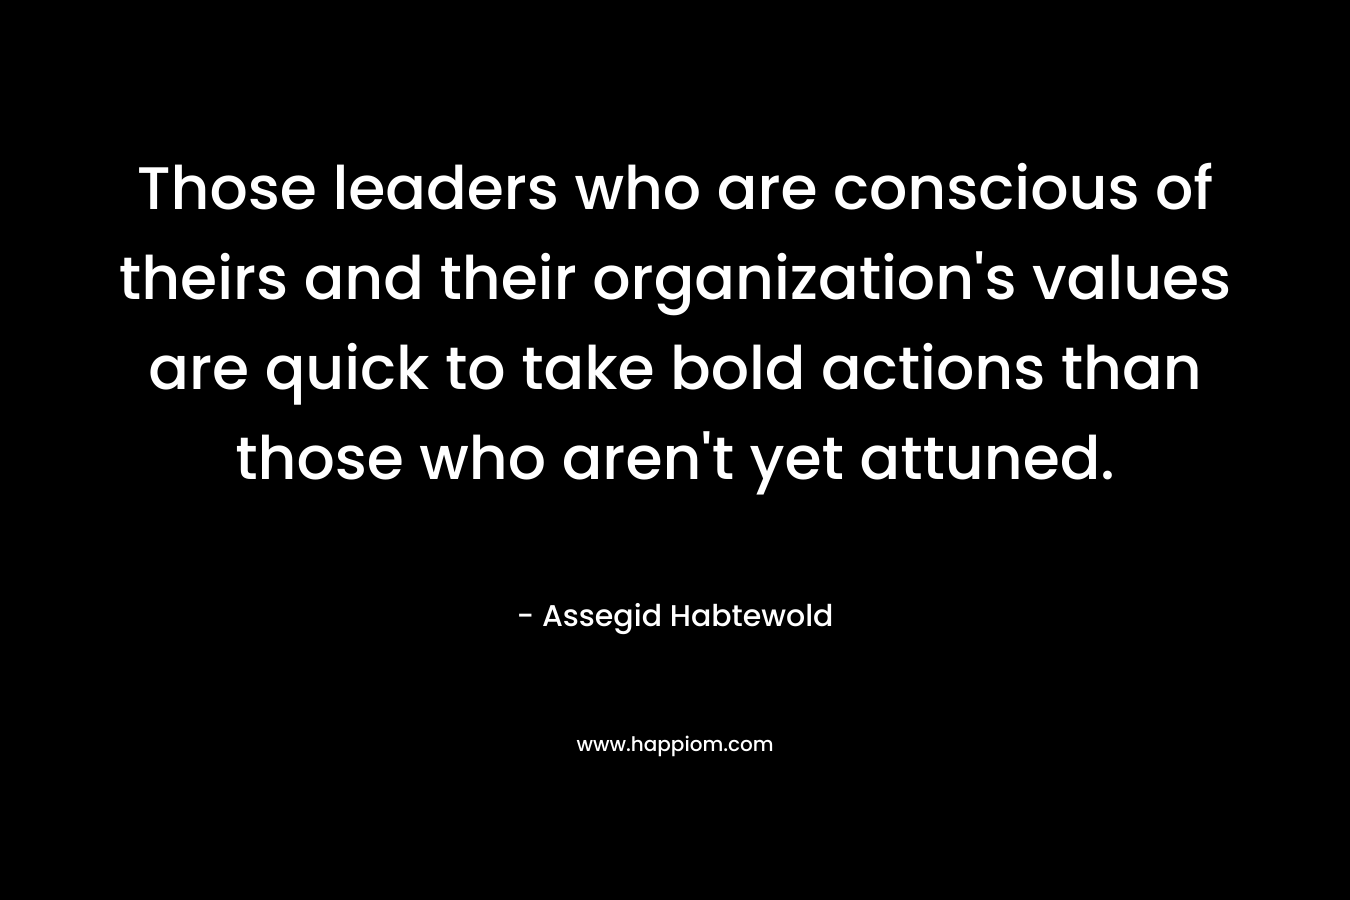 Those leaders who are conscious of theirs and their organization's values are quick to take bold actions than those who aren't yet attuned.